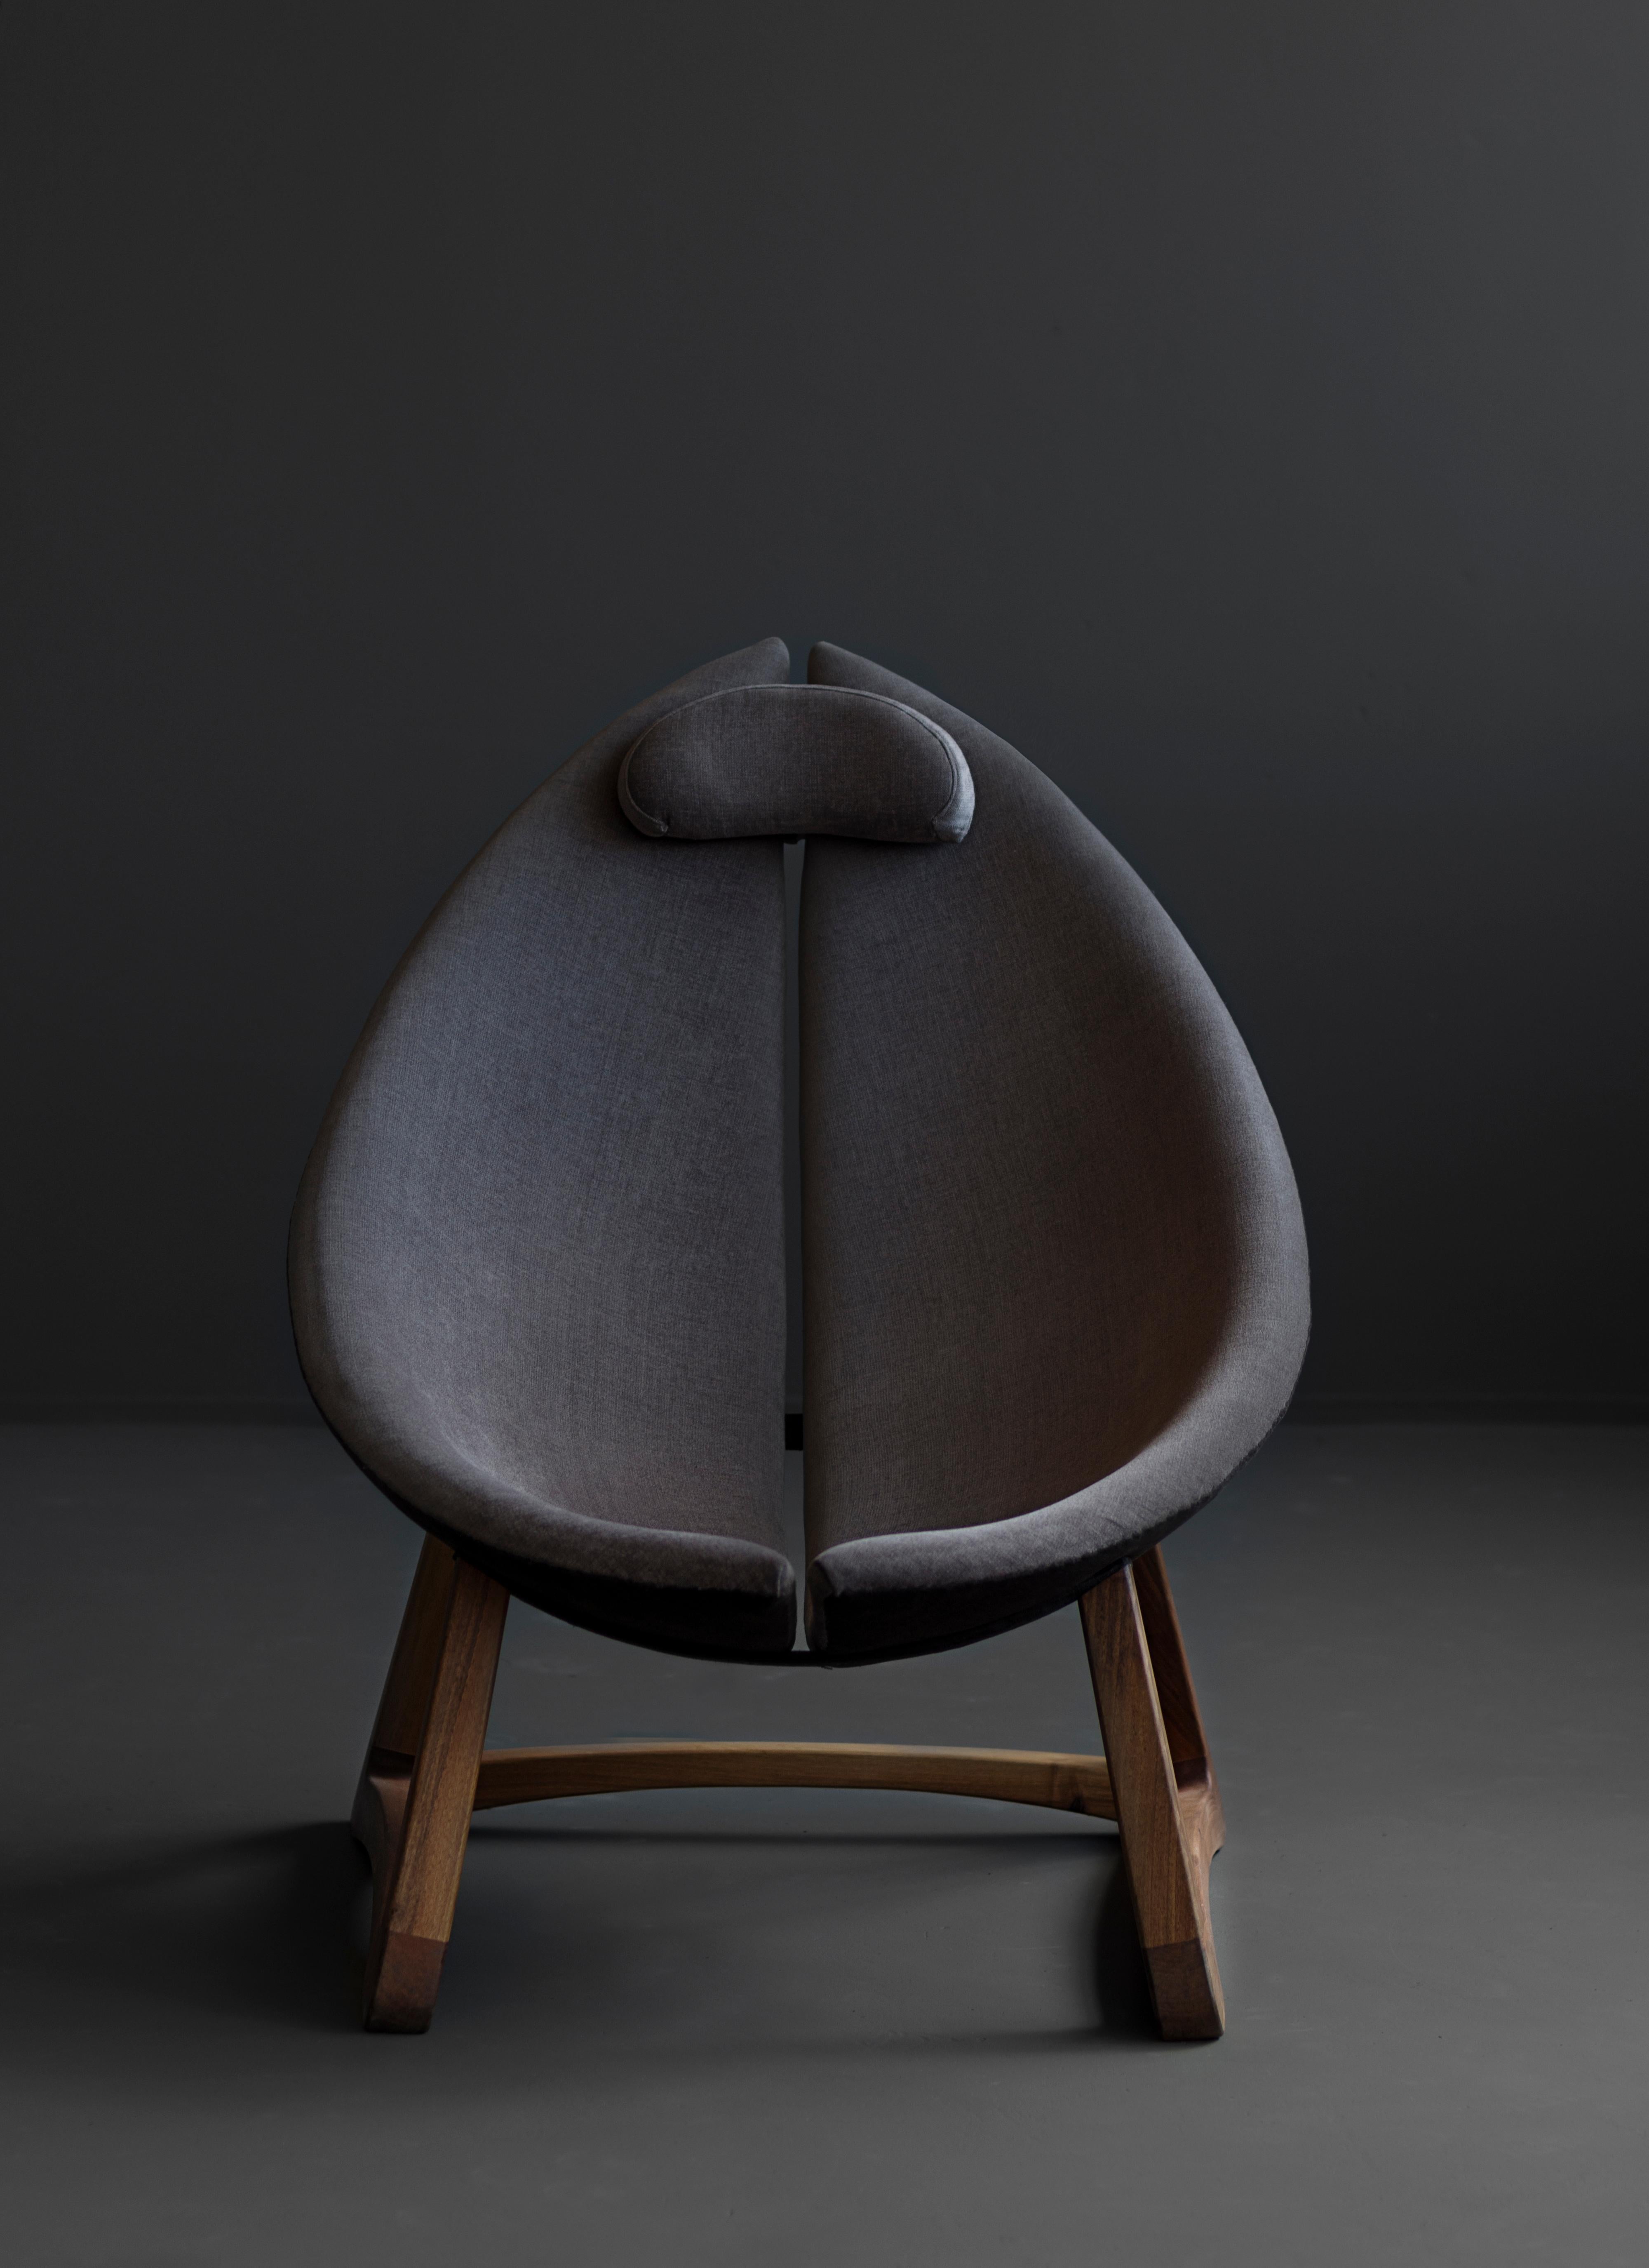 The basic characteristic of this armchair is the 